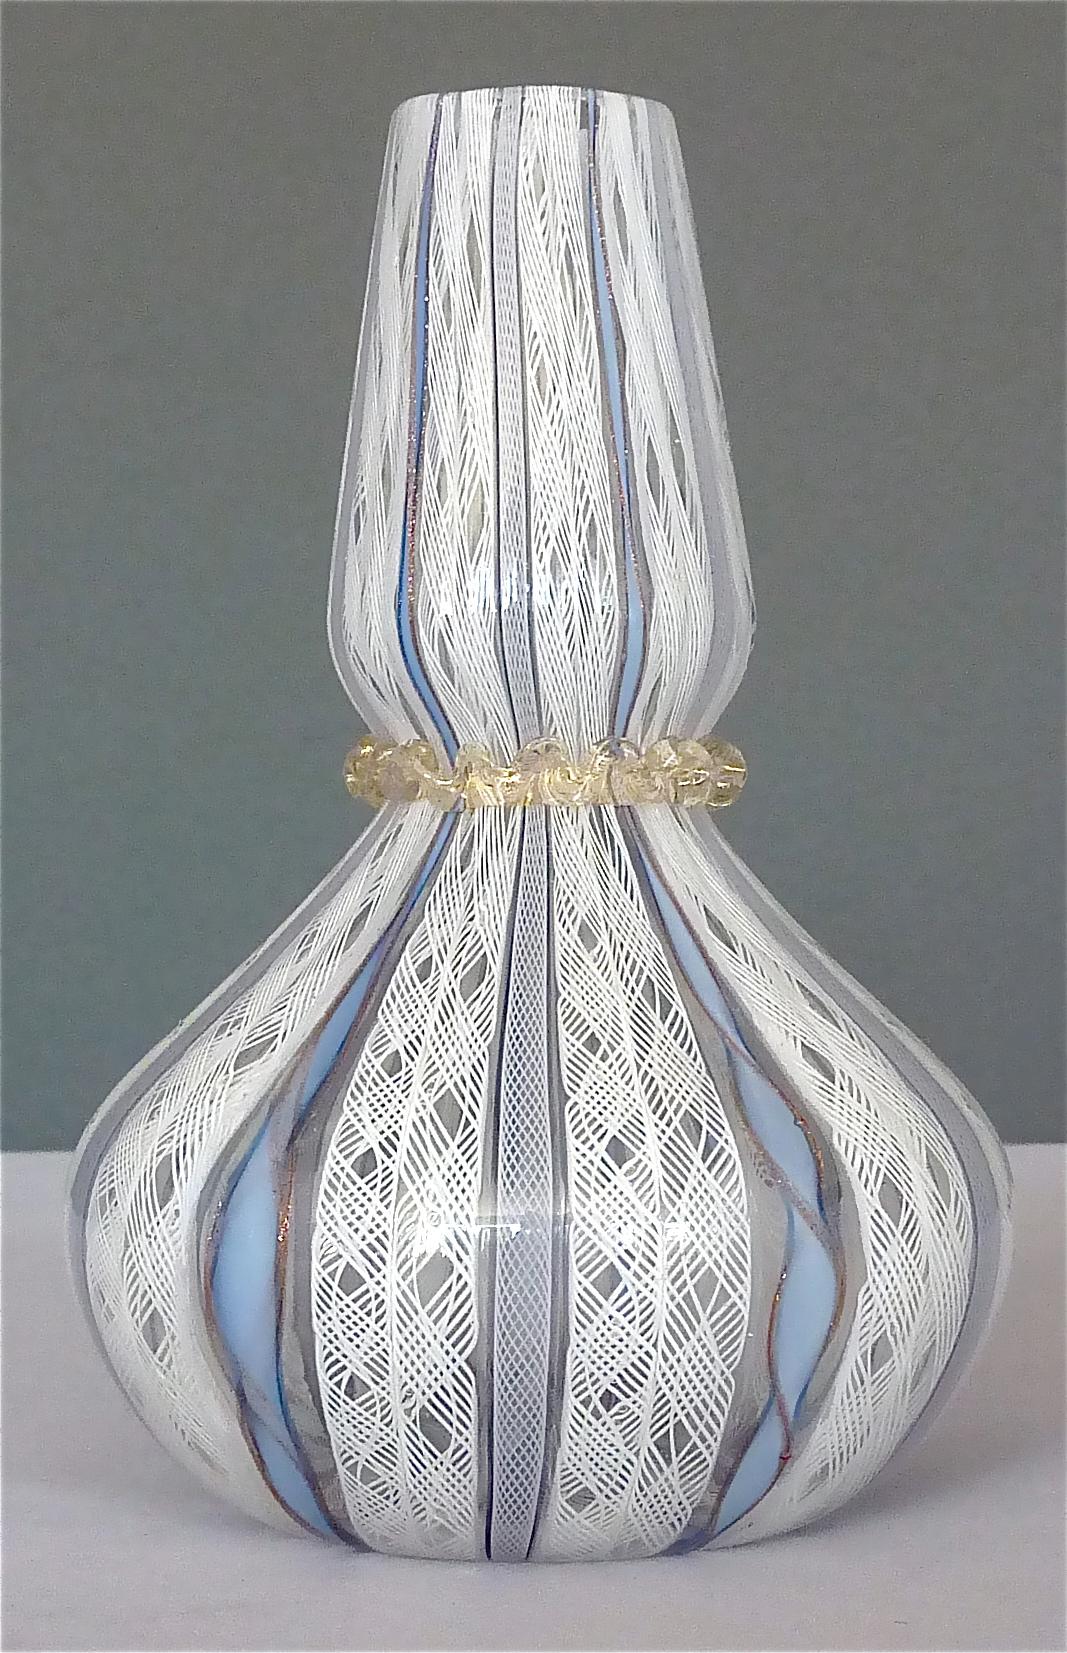 Lovely handcrafted and authentic art glass vase designed by Dino Martens for Aureliano Toso, Murano Italy, circa 1950. Amazing executed white net 